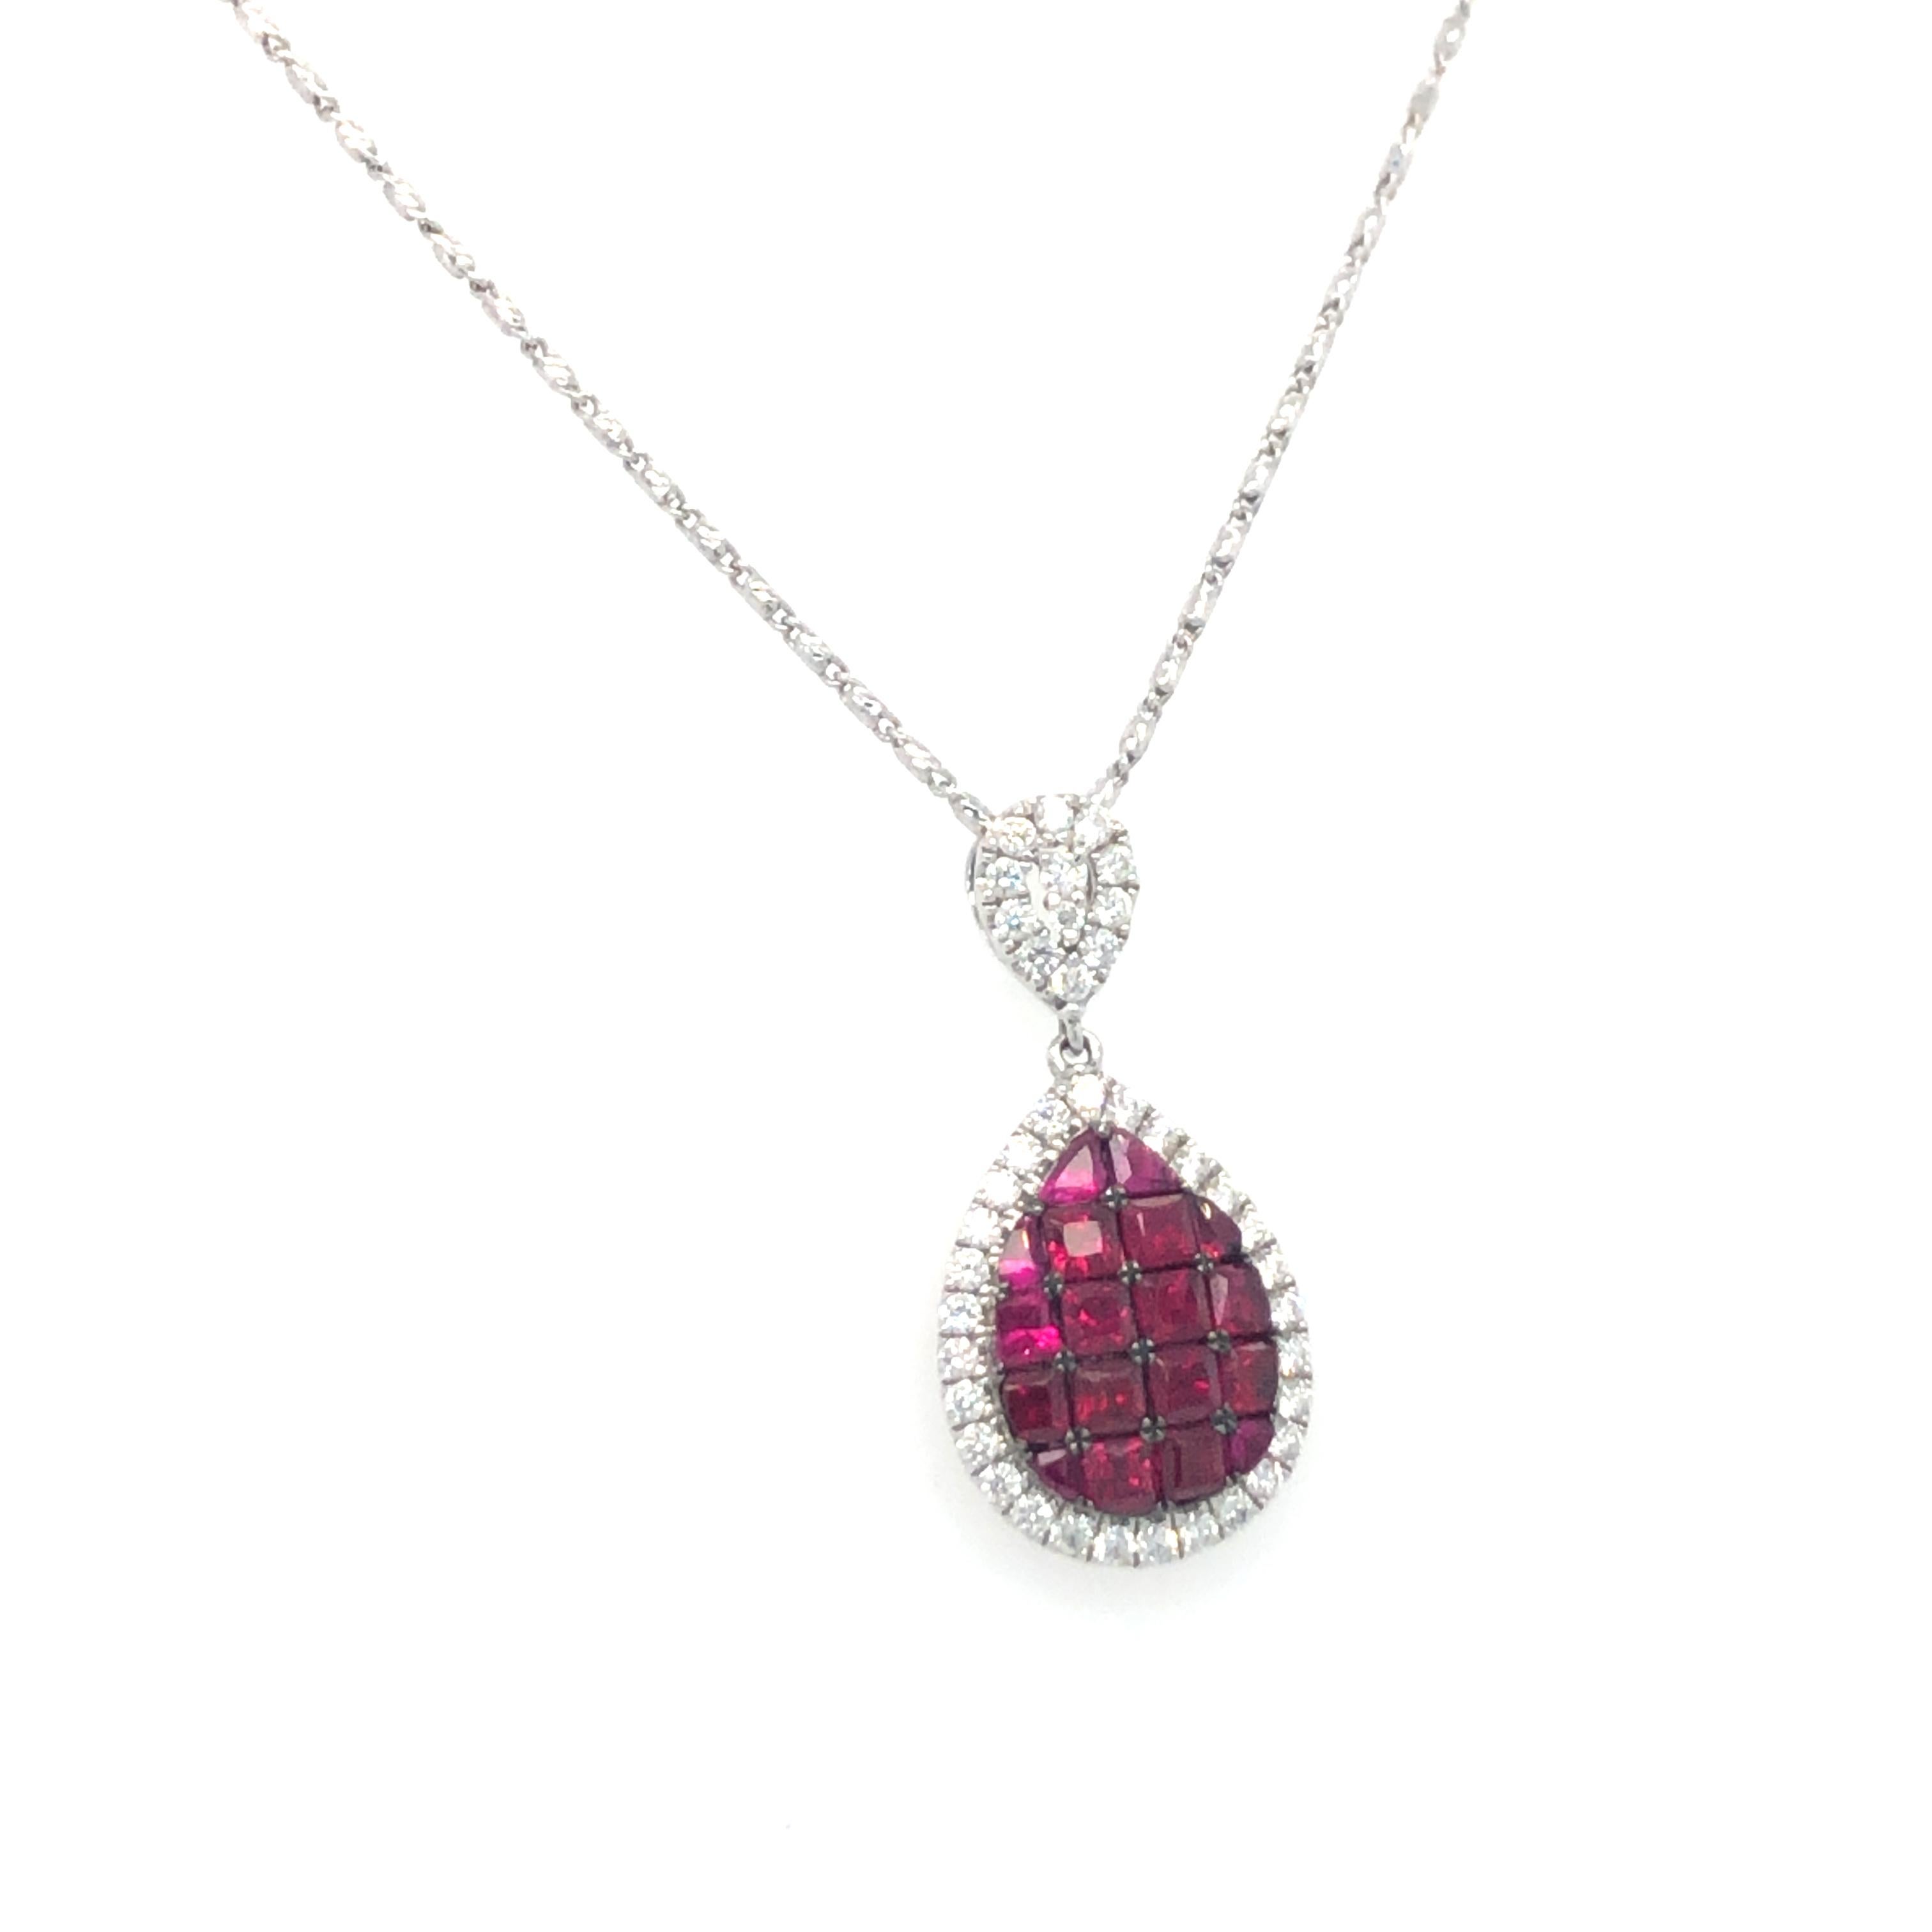 Illusion Ruby 1.37ct and Diamond Teardrop Pendant Necklace in 14k White Gold.
18